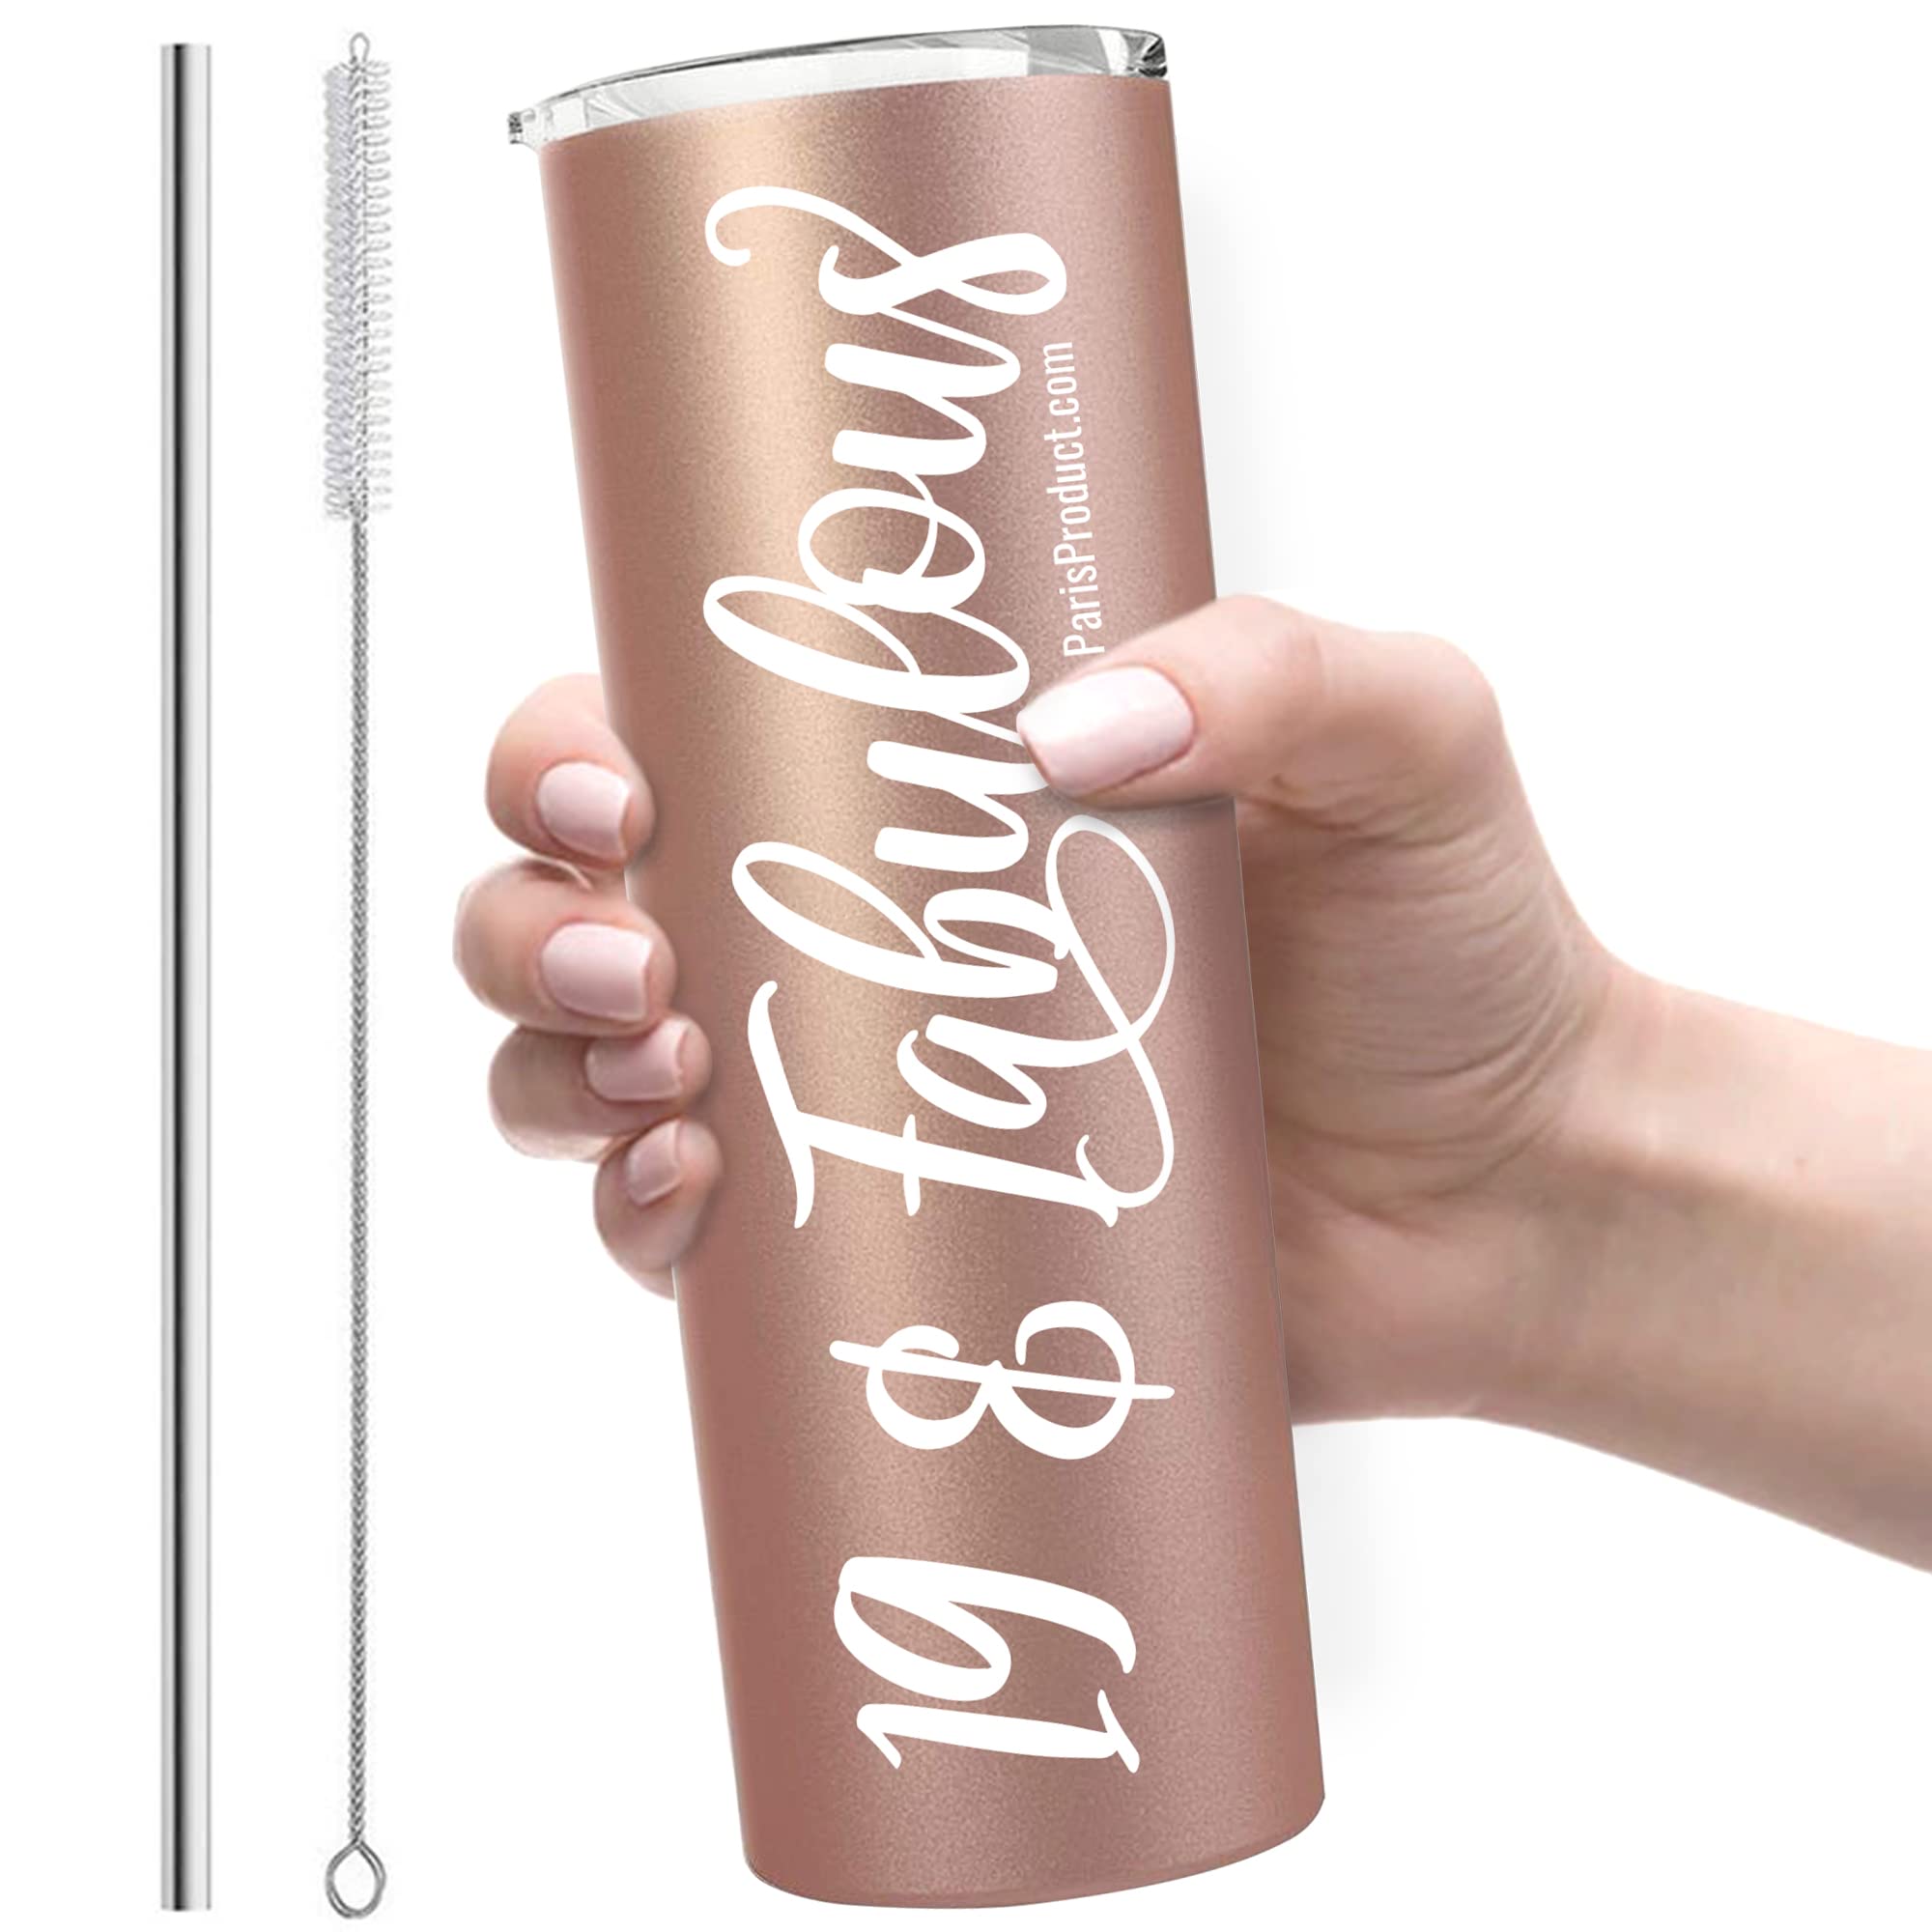 19 & Fabulous 20oz Stainless Steel Tumbler 19 Year Old Birthday Gifts For  Her, 19th Birthday Decorations For Women, 19 Year Old Gifts, 19th Birthday  Gifts For Girls, Gifts For 19 Year